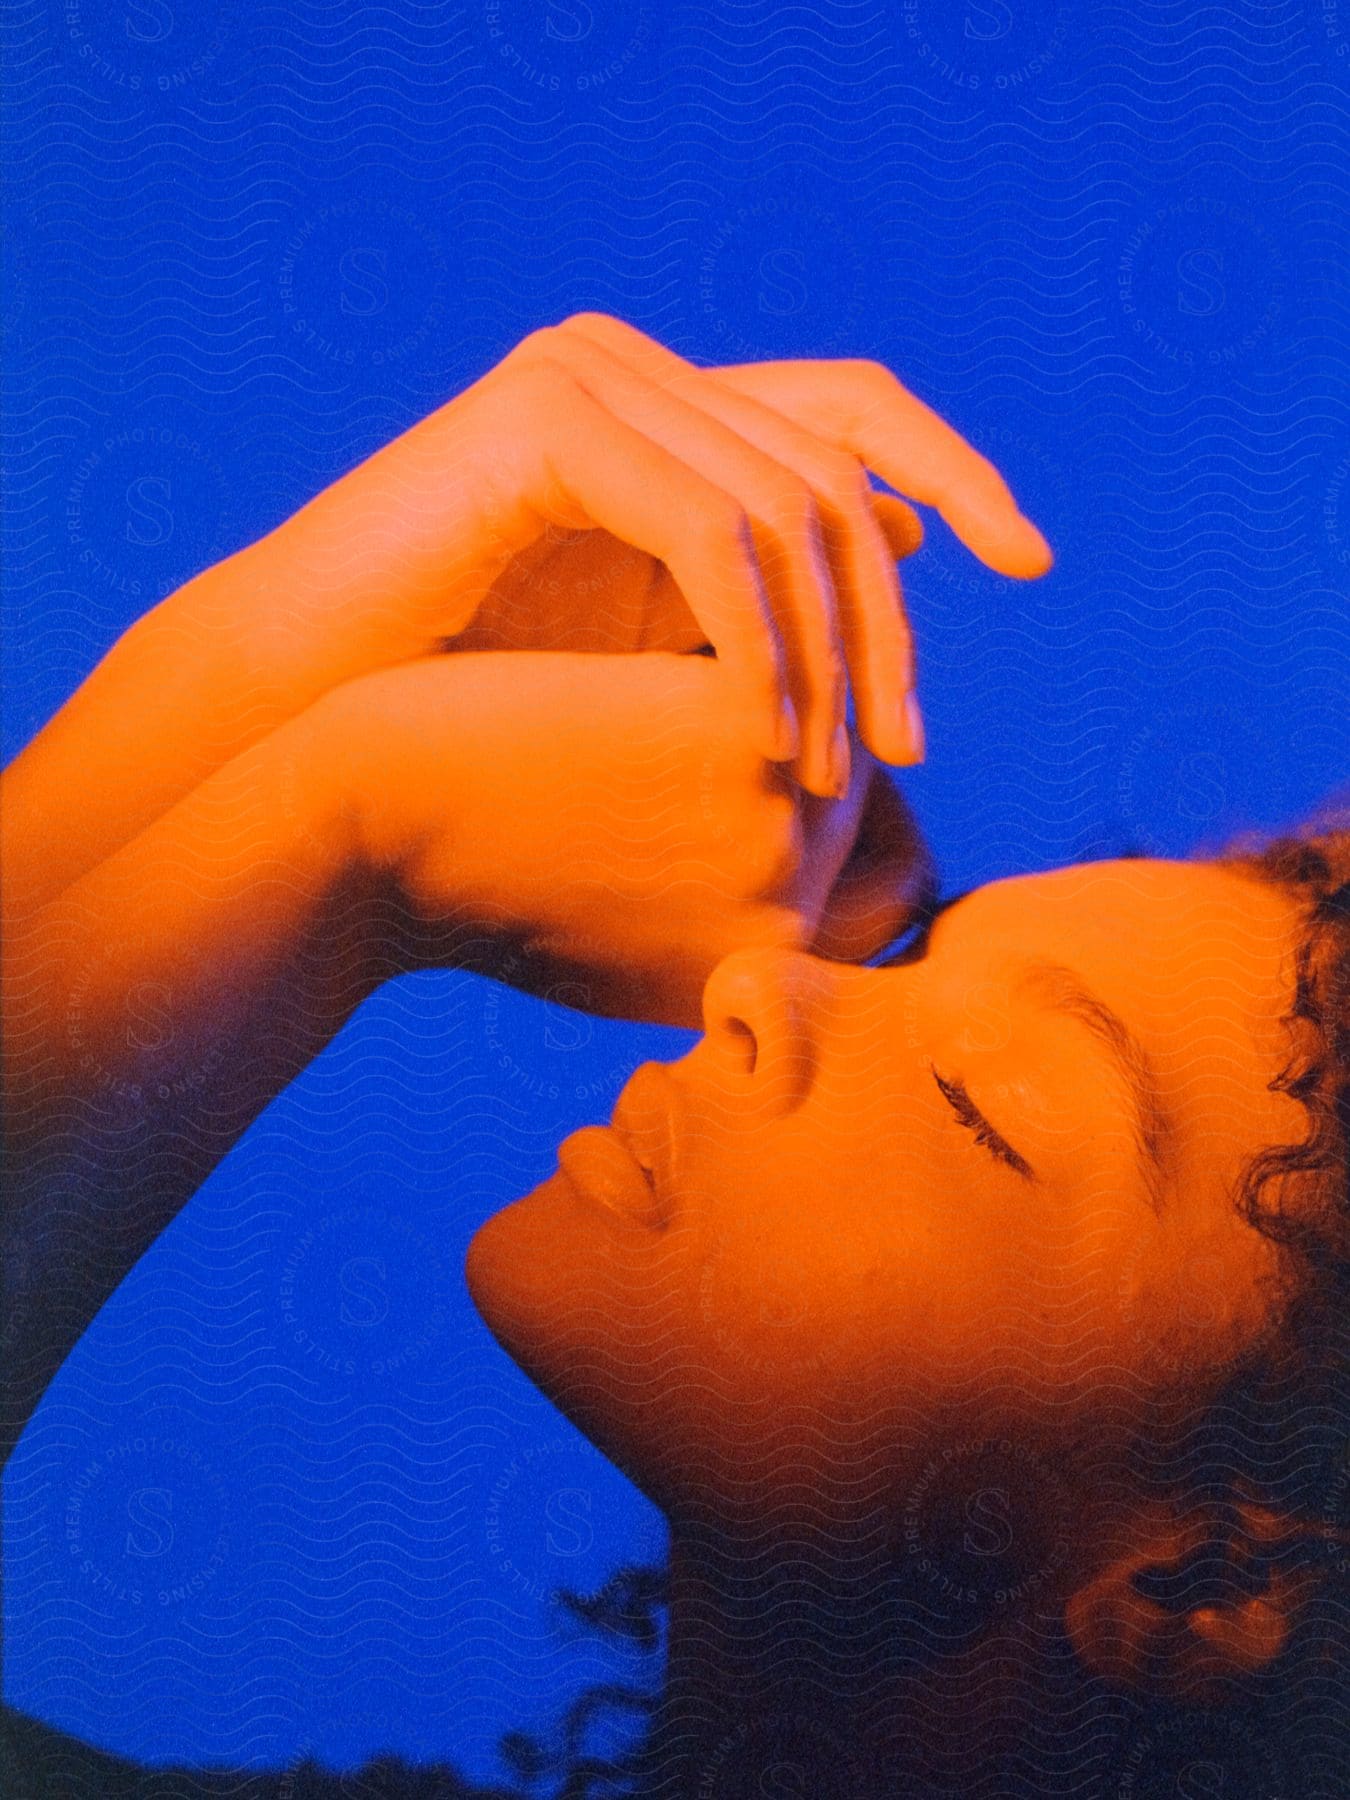 A female poses with her arms up above her face in orange lighting.